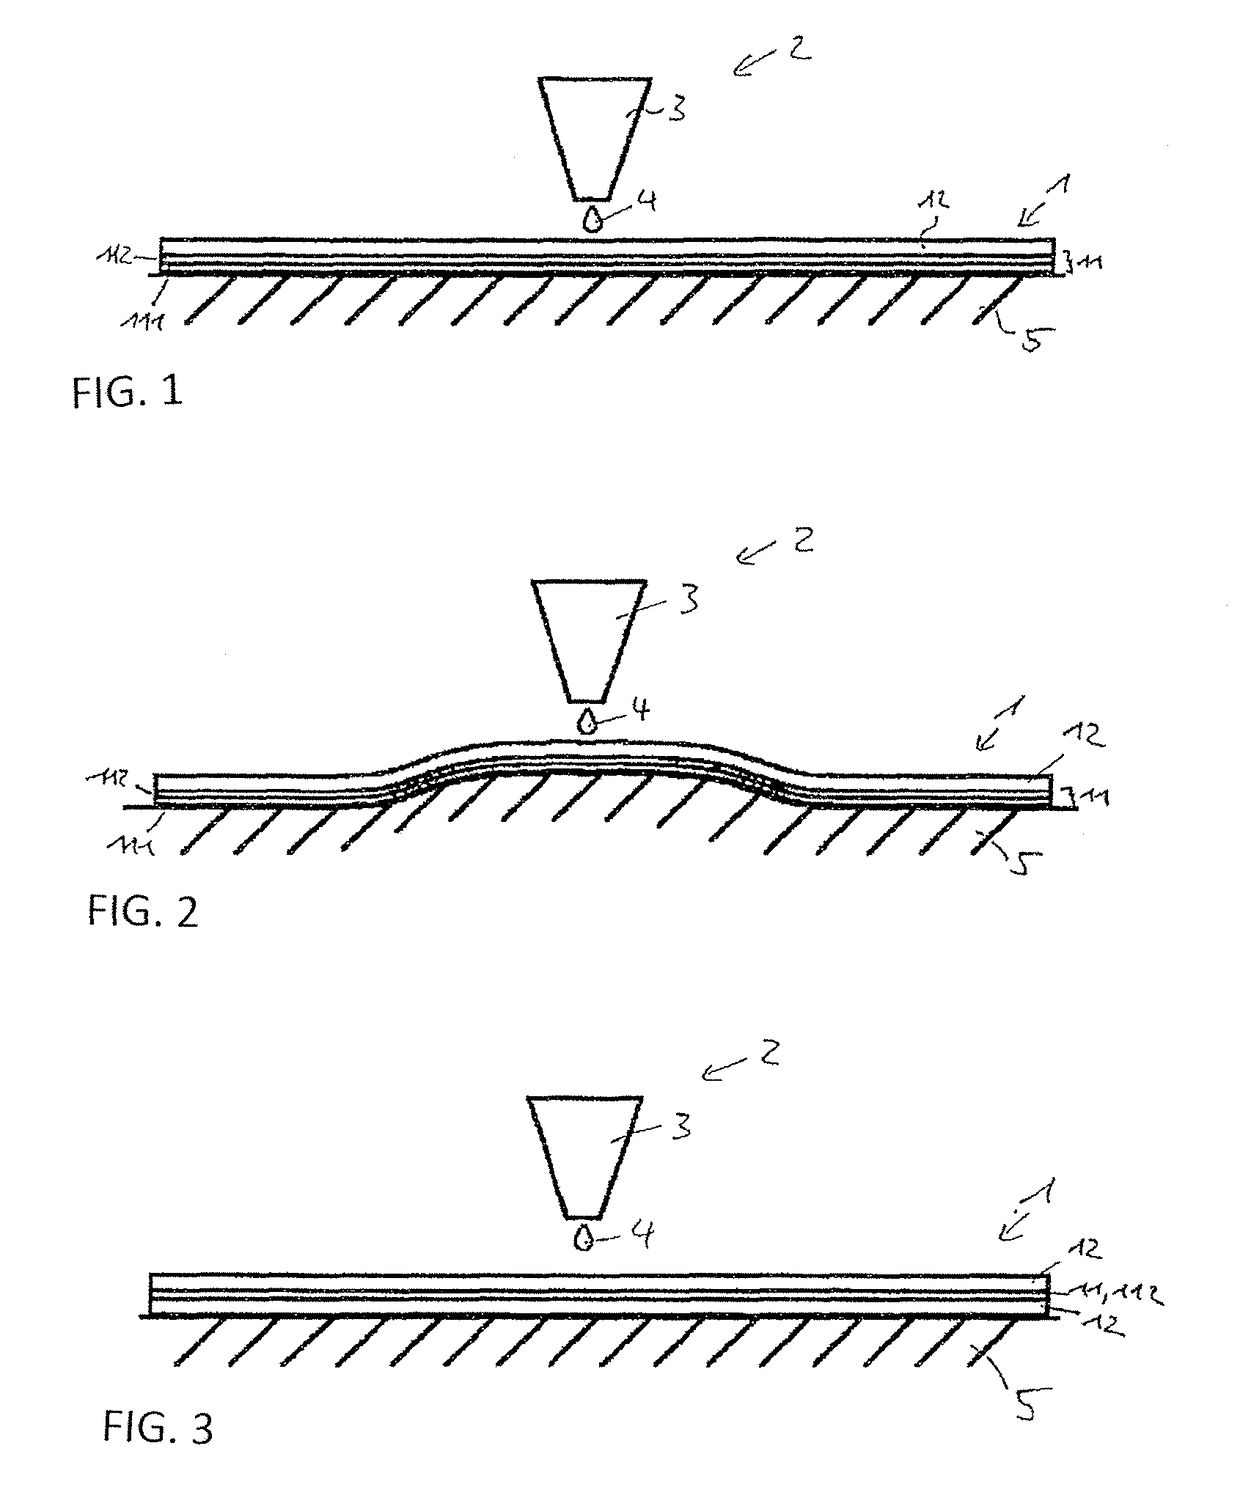 Method of 3D printing plastic molding compound on foil ply